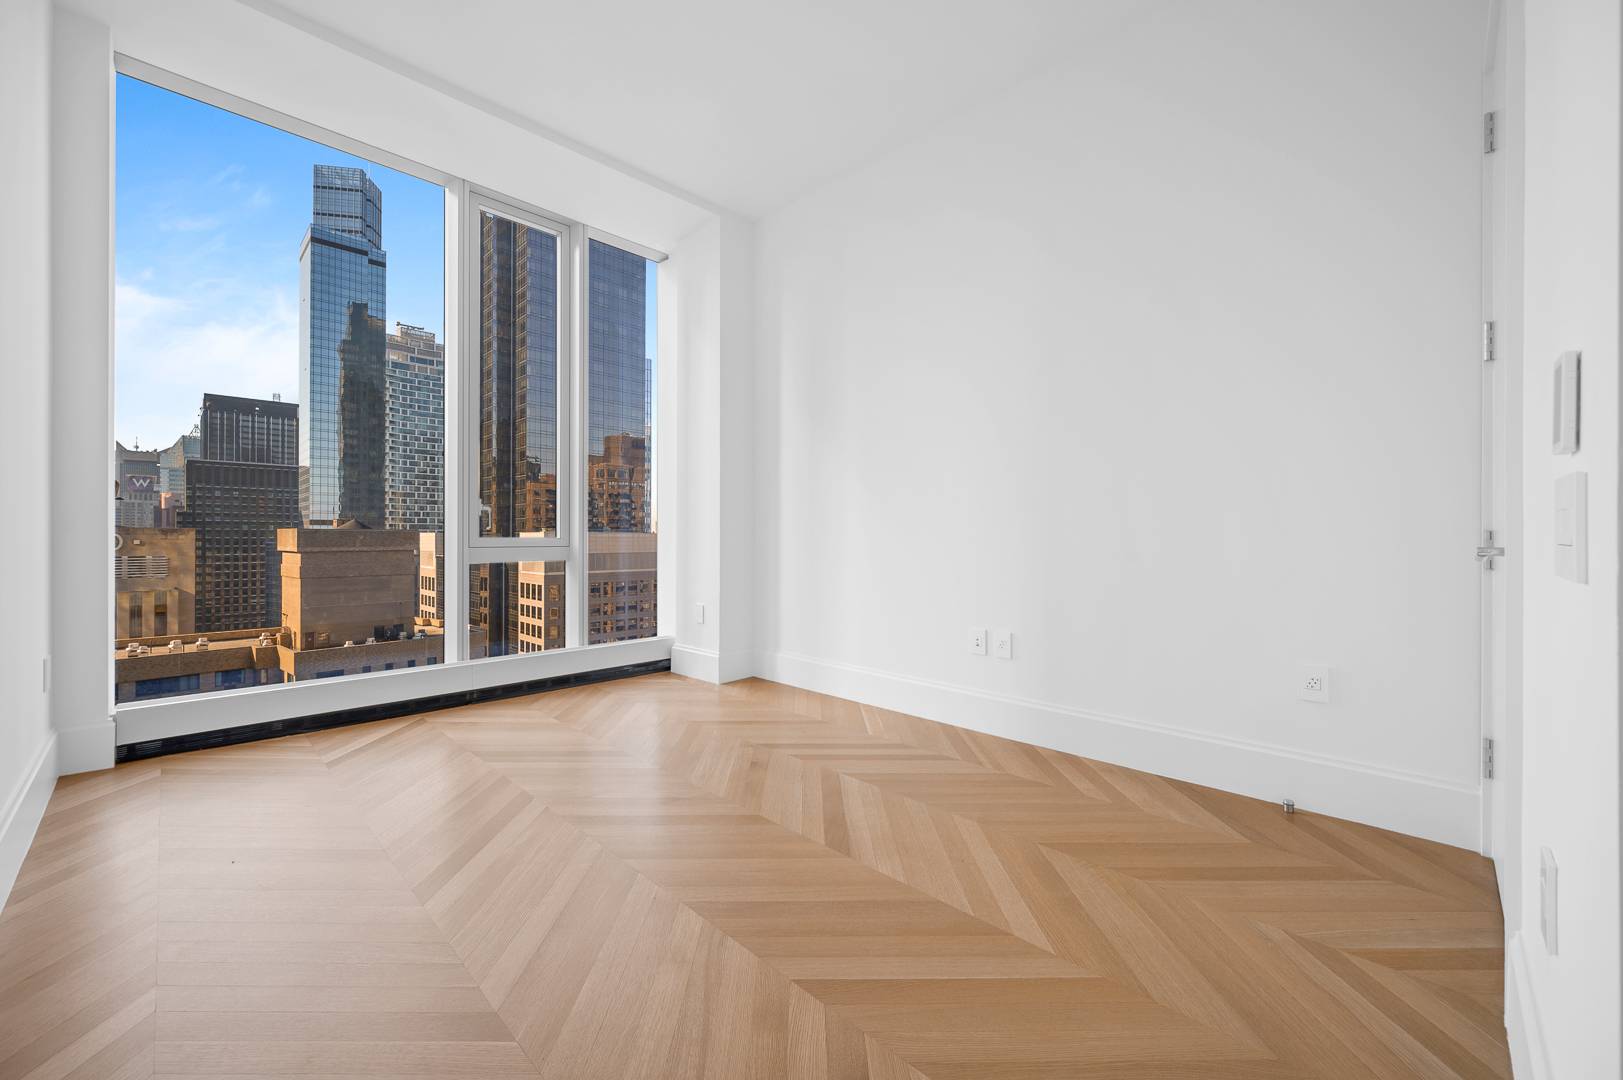 JUST LISTED! Studio at the iconic Central Park Tower for Rent!